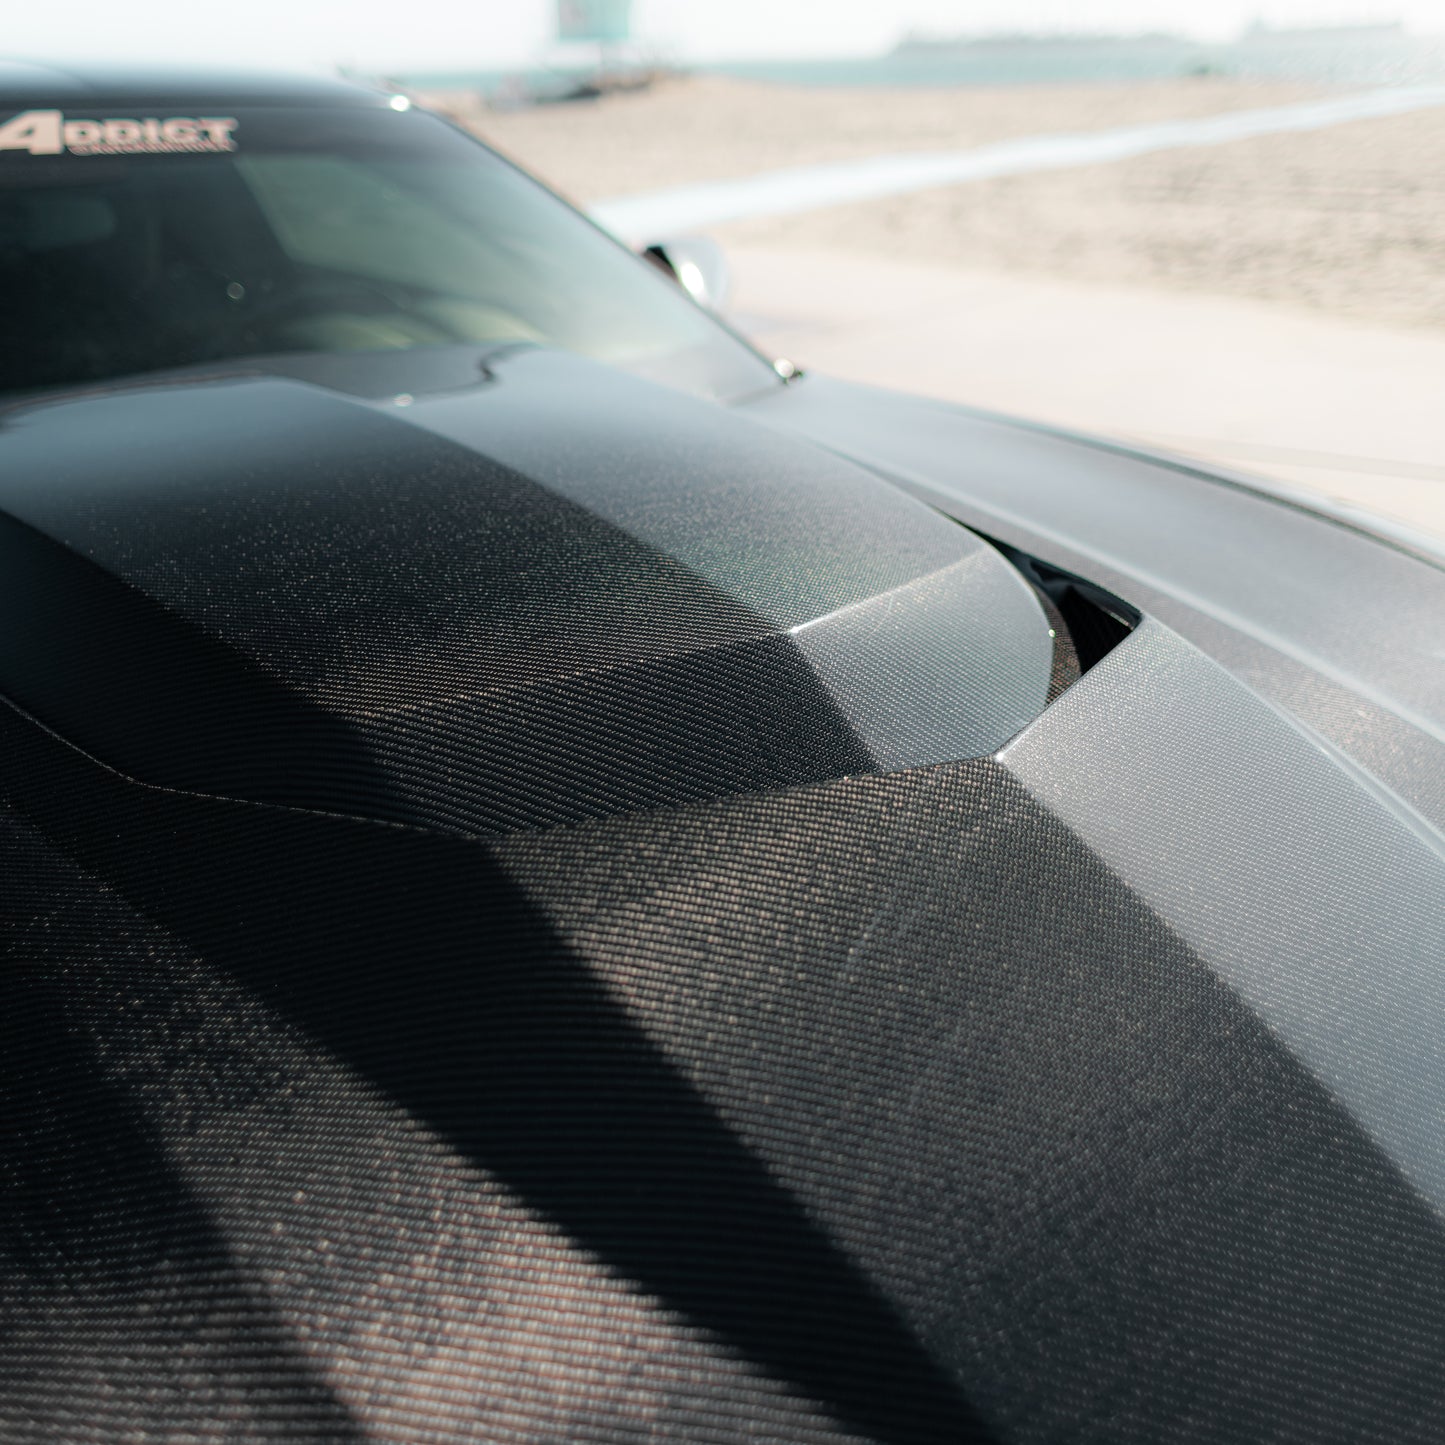 2010-2015 Chevy Camaro Type-ZR Carbon Fiber Double Sided Hood